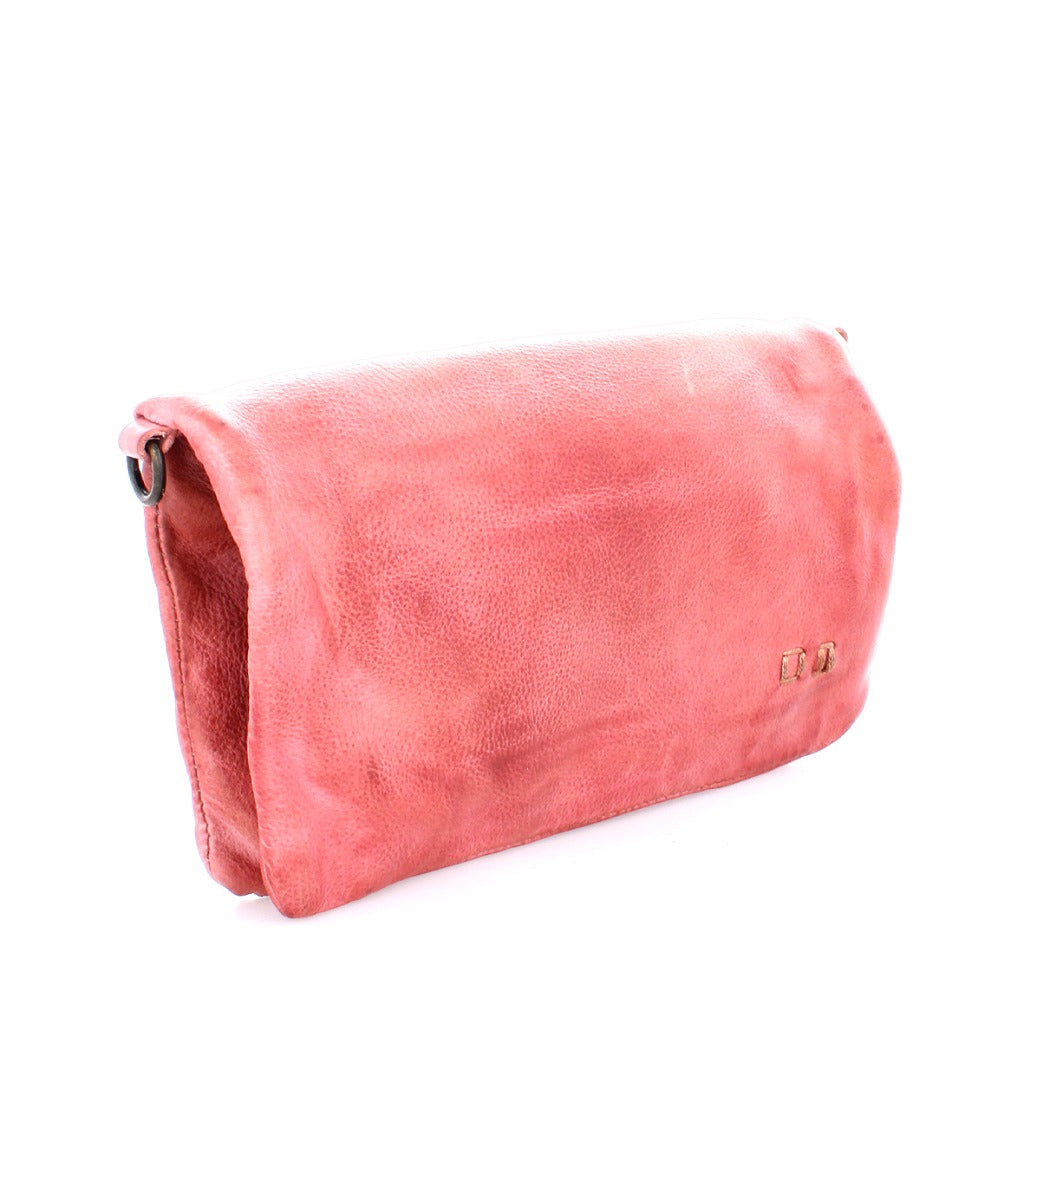 A Cadence pink leather clutch bag by Bed Stu.